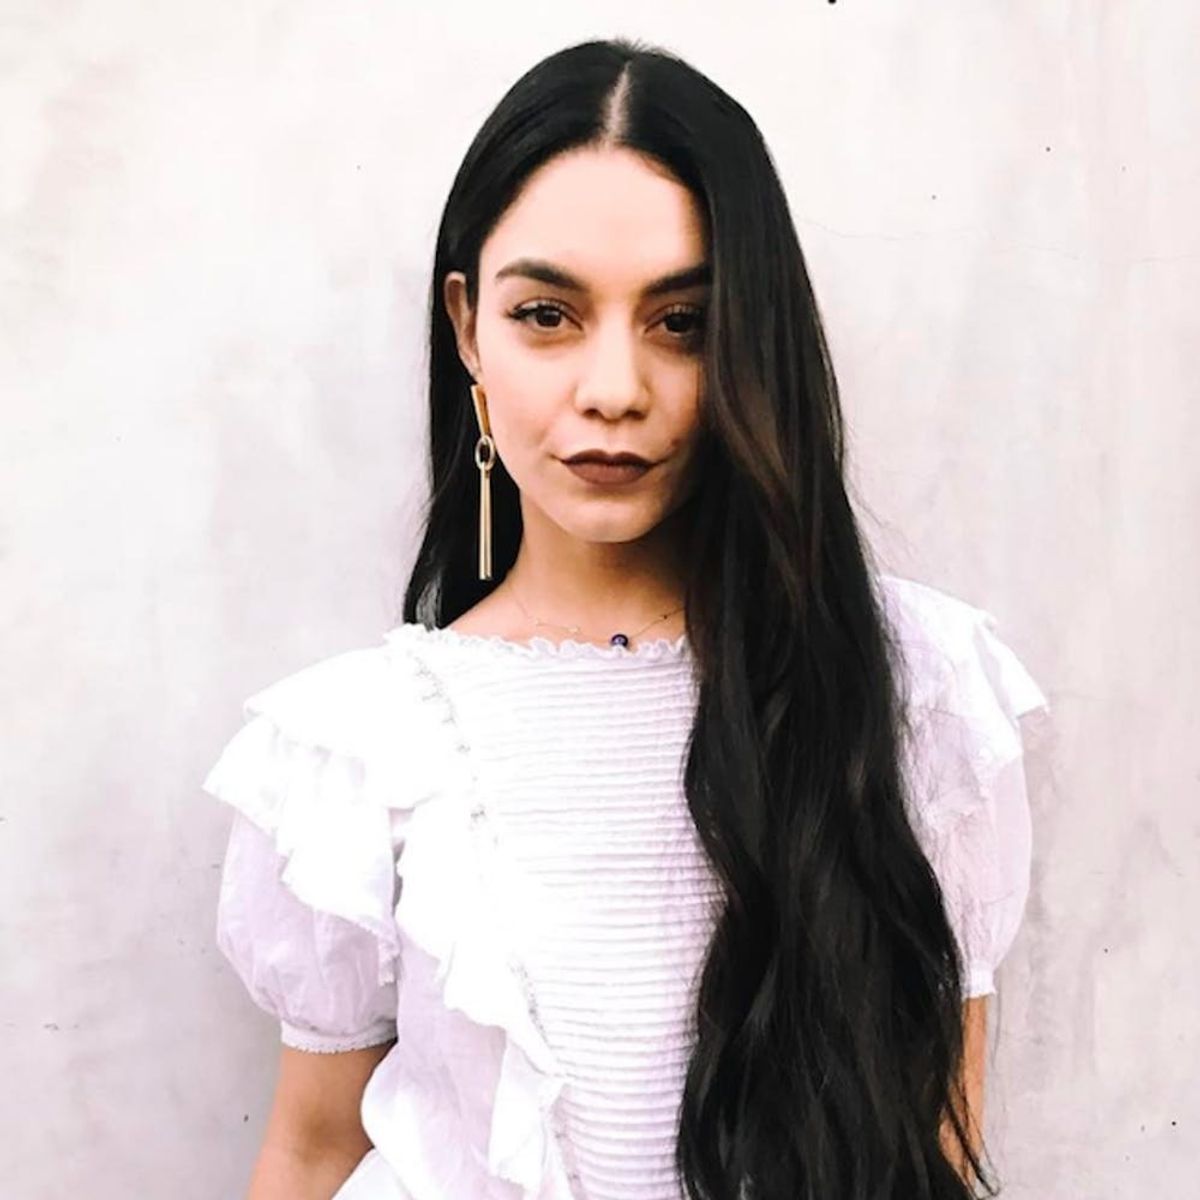 Vanessa Hudgens Is Sporting 2 Feet of Hair for Her Latest Movie Role